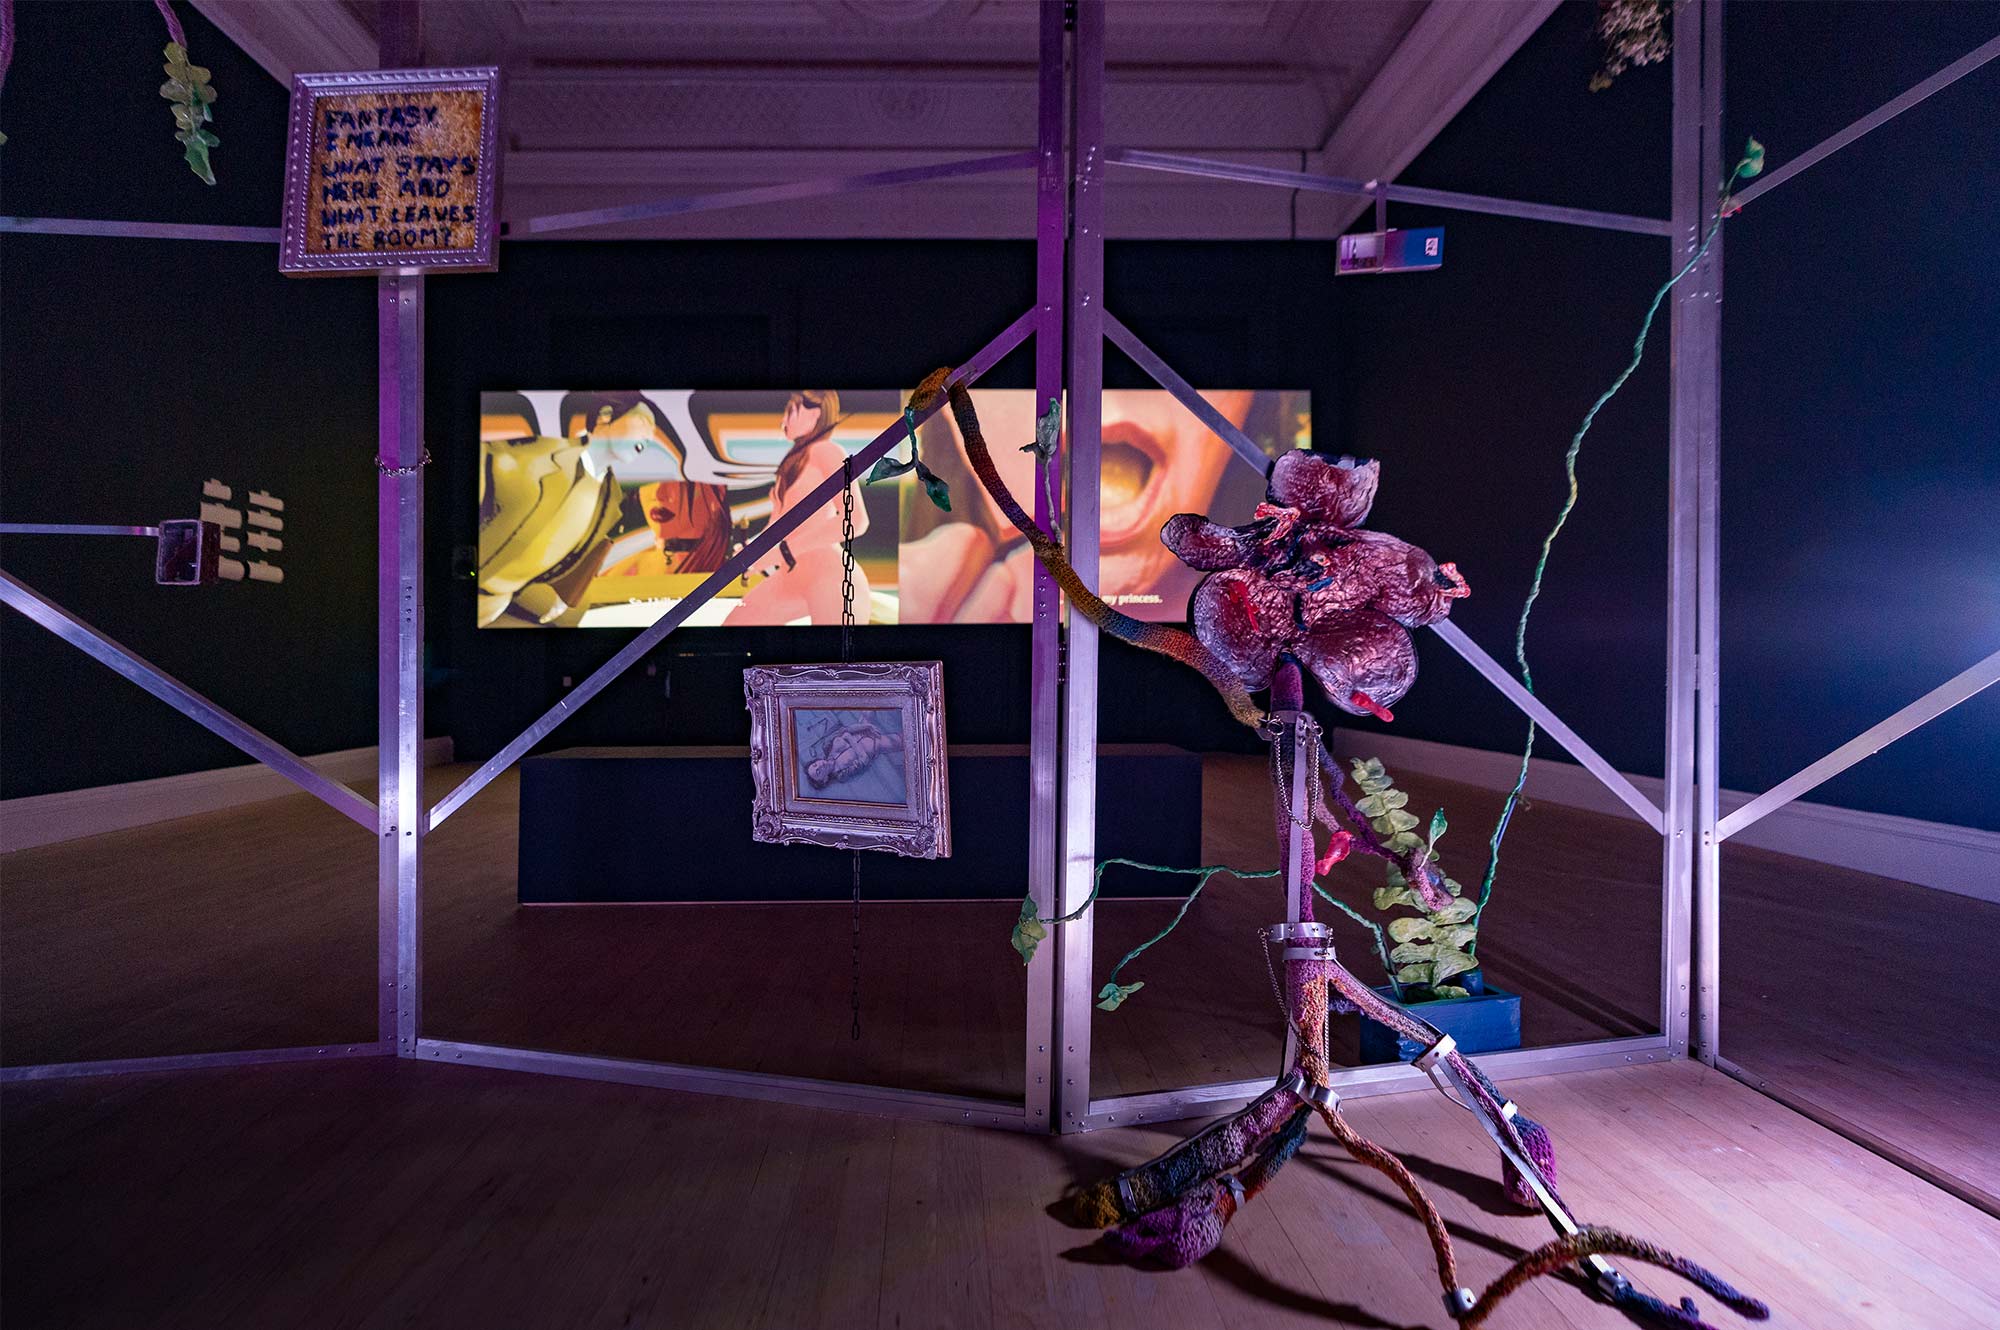 Metal frames surround a mutant flower sculpture. Behind them is a video piece displaying a 3D-rendered sex worker.